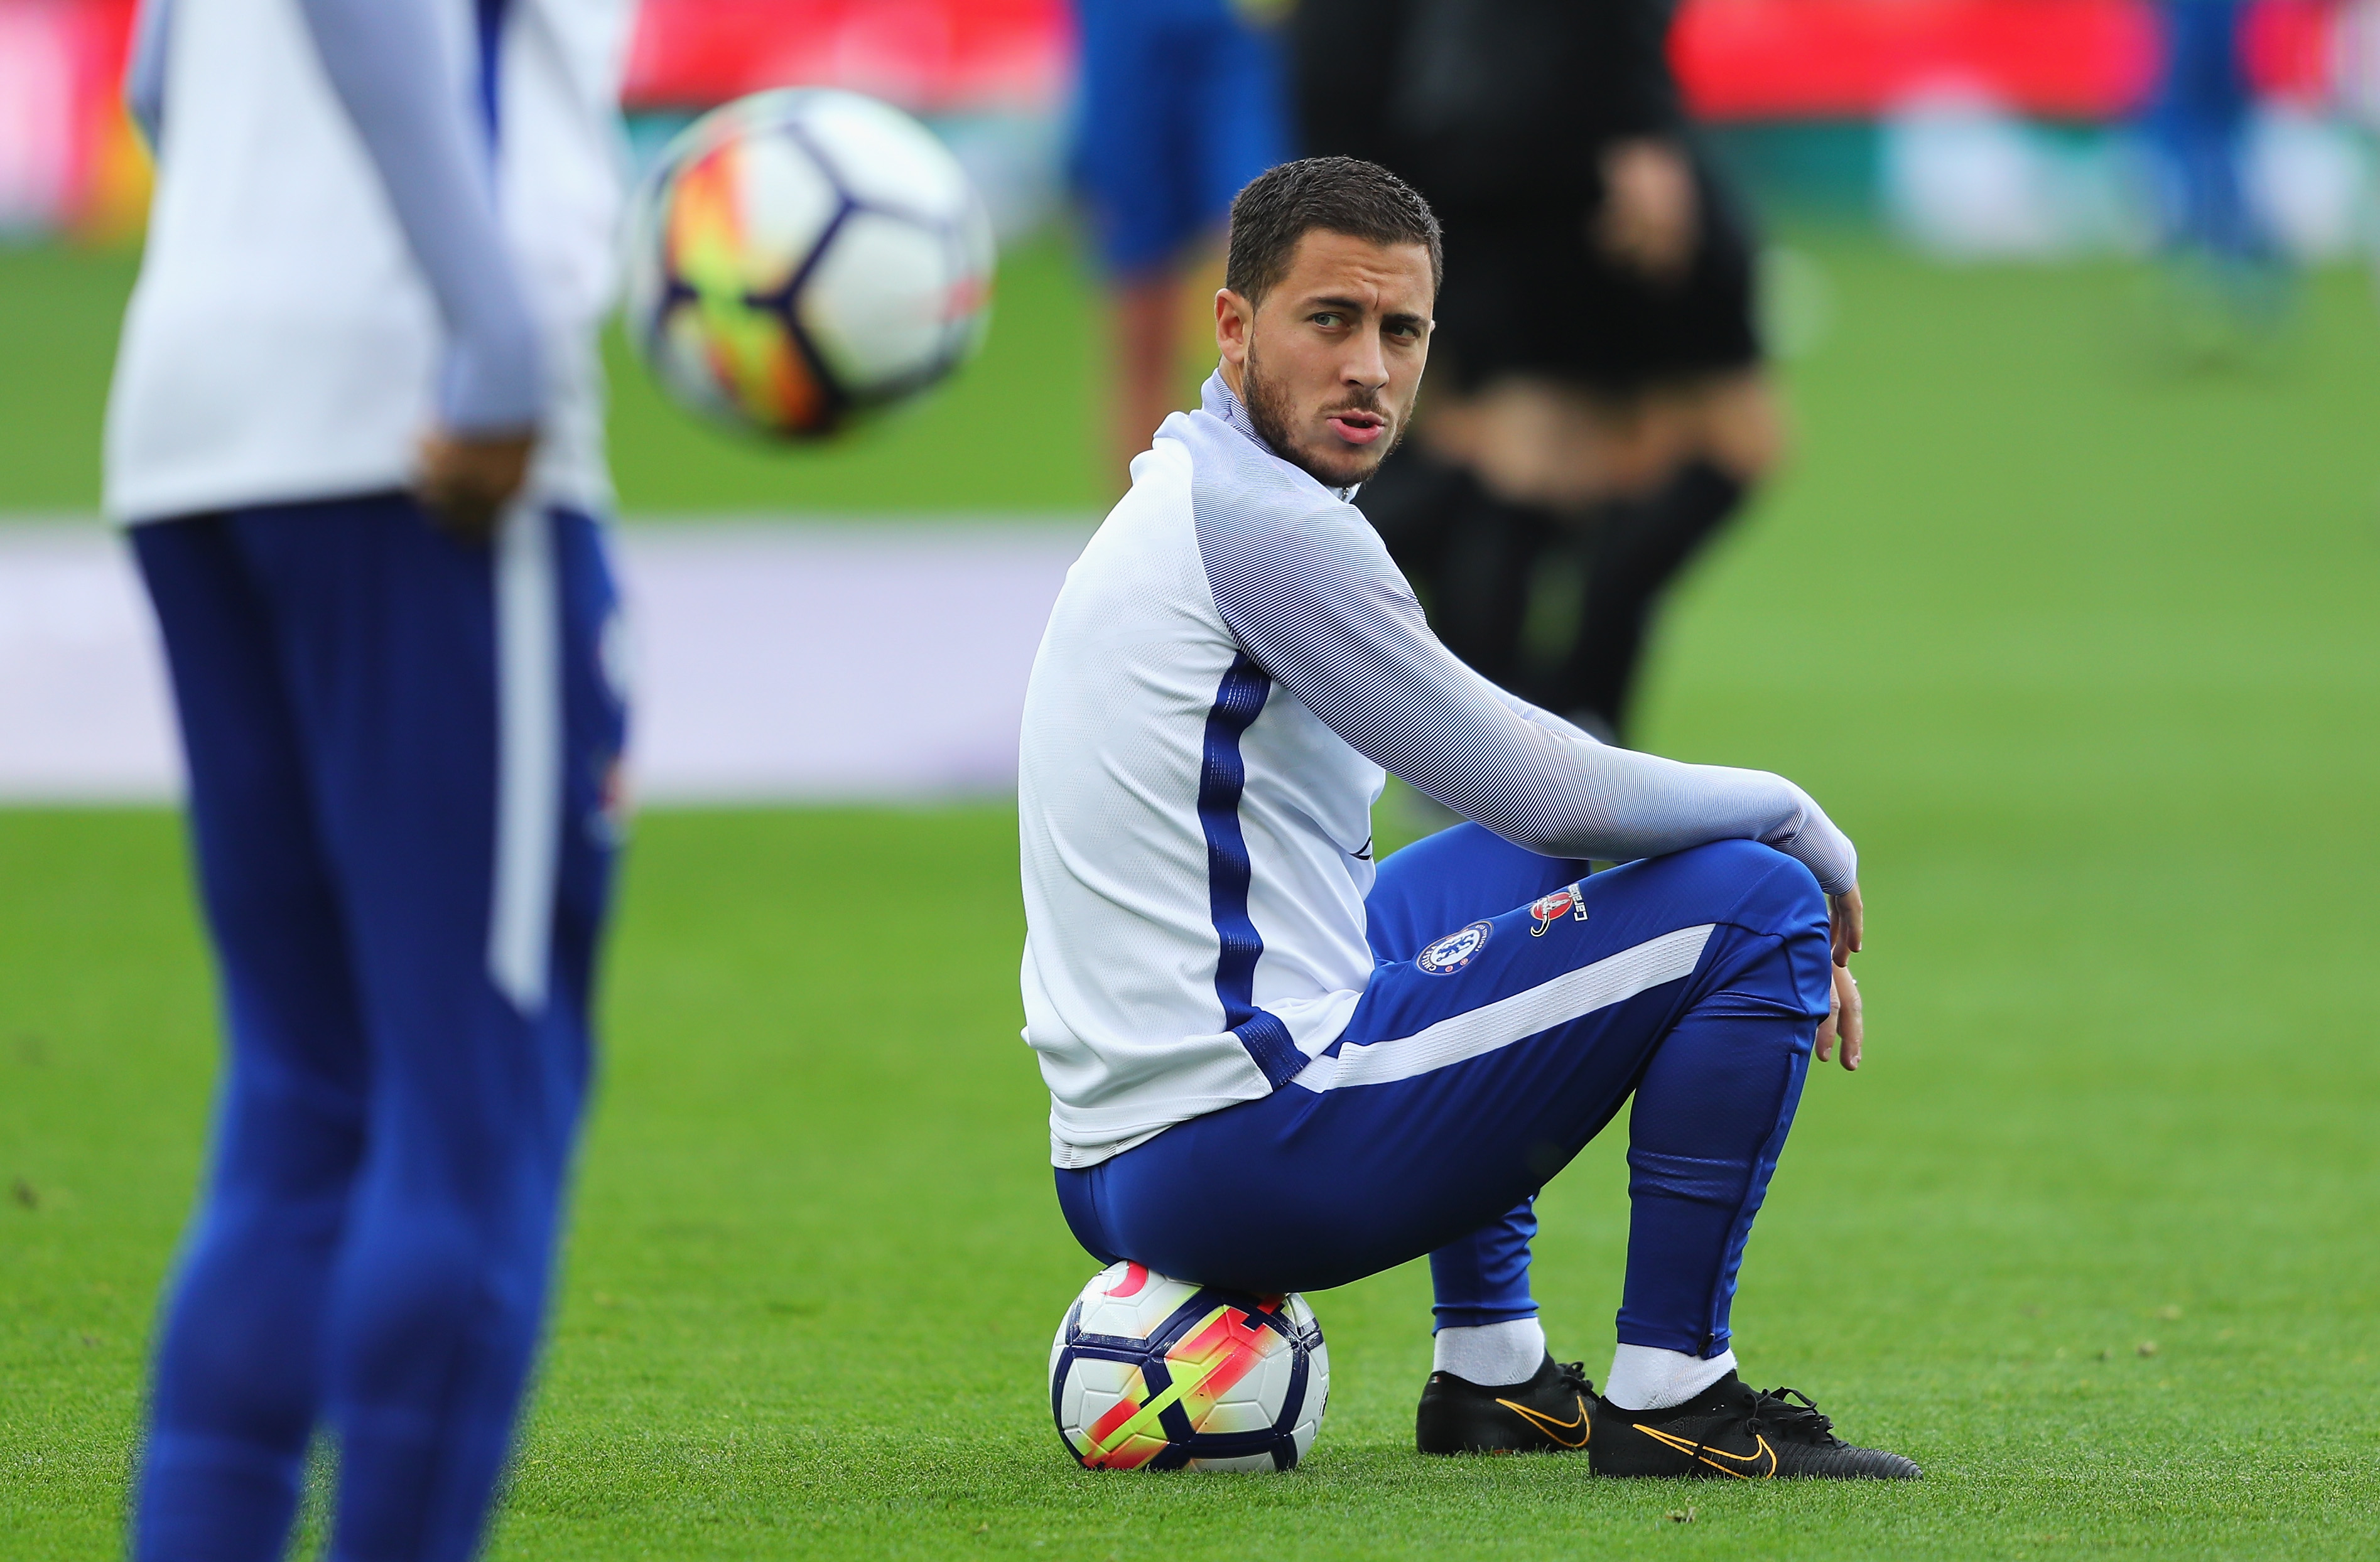 STOKE ON TRENT, ENGLAND - SEPTEMBER 23:  Eden Hazard of Chelsea looks on prior to the Premier League match between Stoke City and Chelsea at Bet365 Stadium on September 23, 2017 in Stoke on Trent, England.  (Photo by Richard Heathcote/Getty Images)